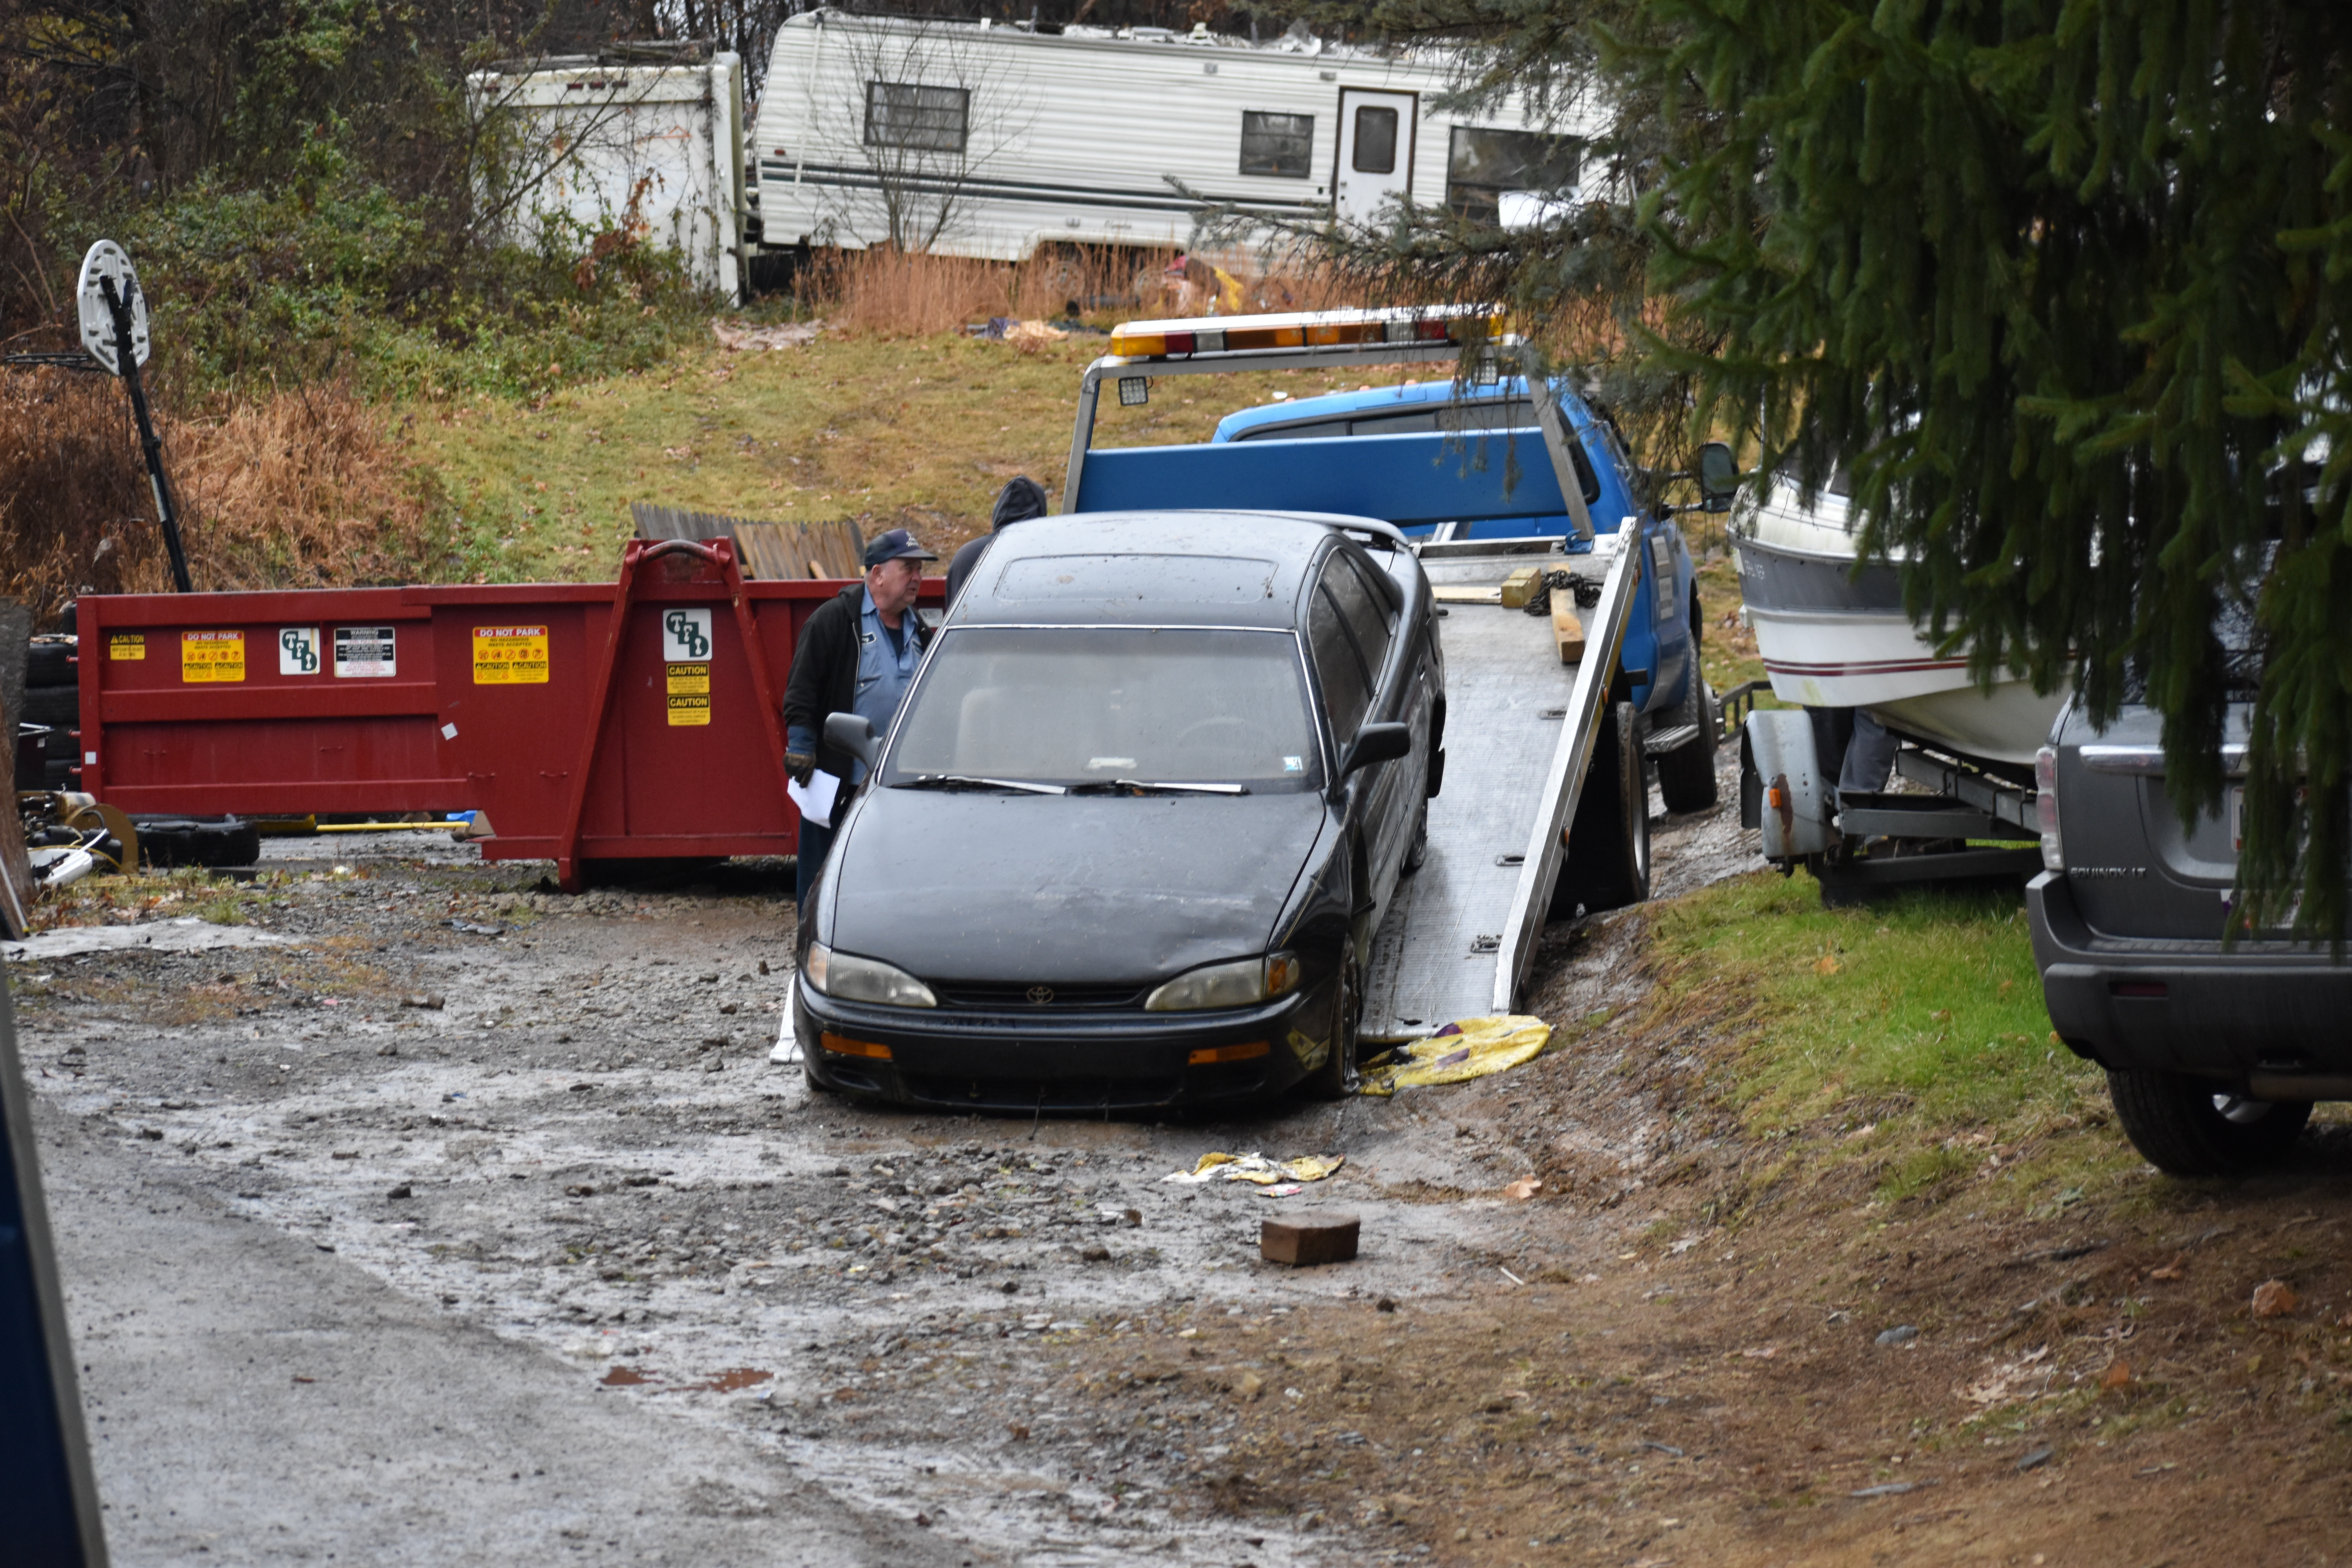 An employee of Schultz Towing and Recovery loads a car for removal from the Phillips property.